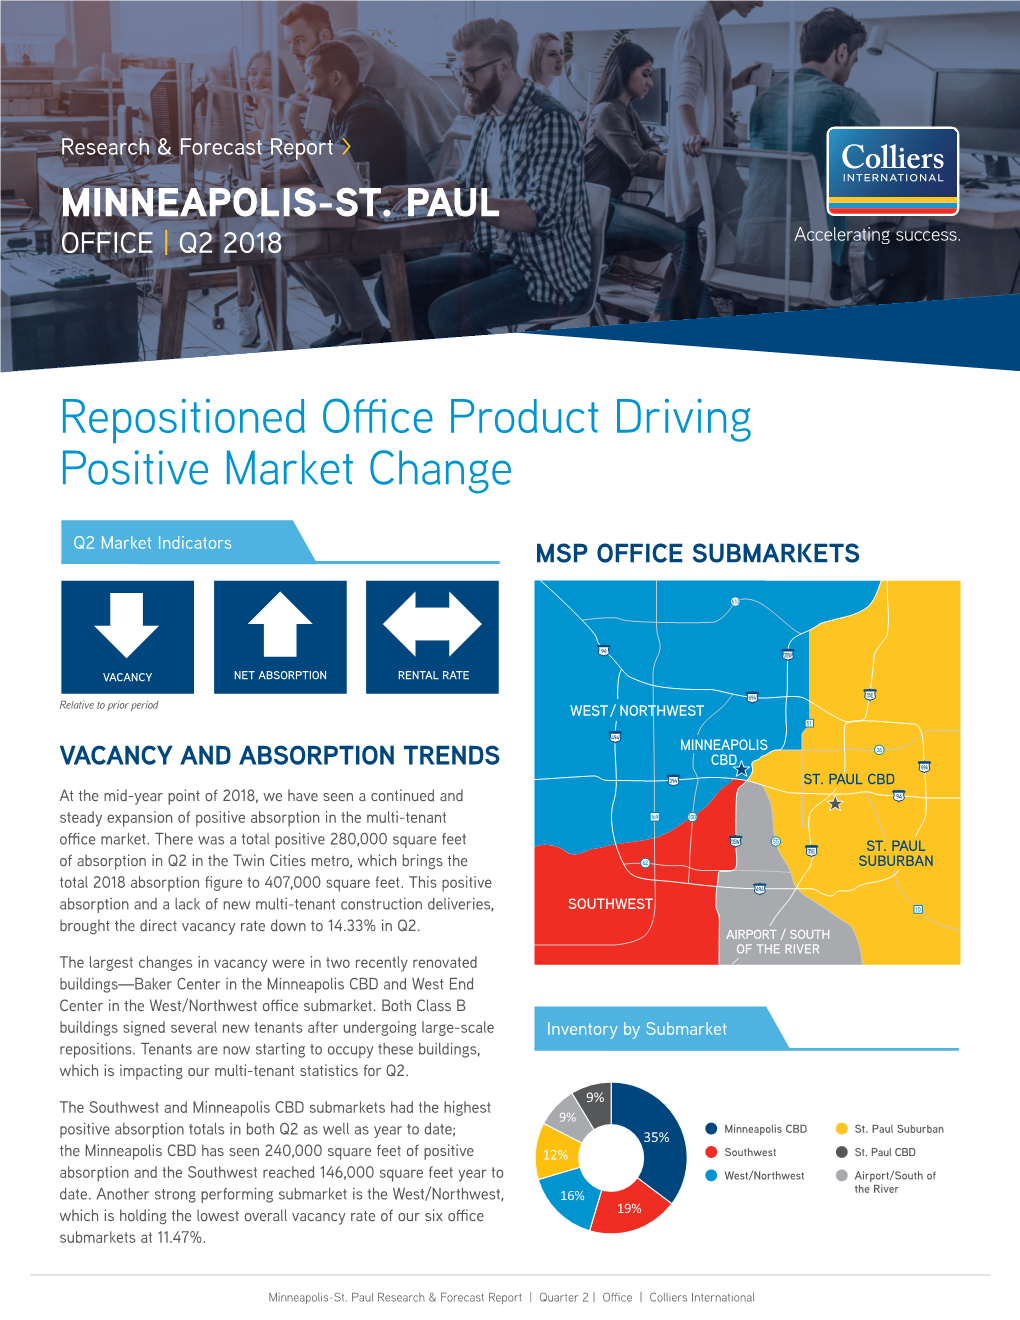 Repositioned Office Product Driving Positive Market Change